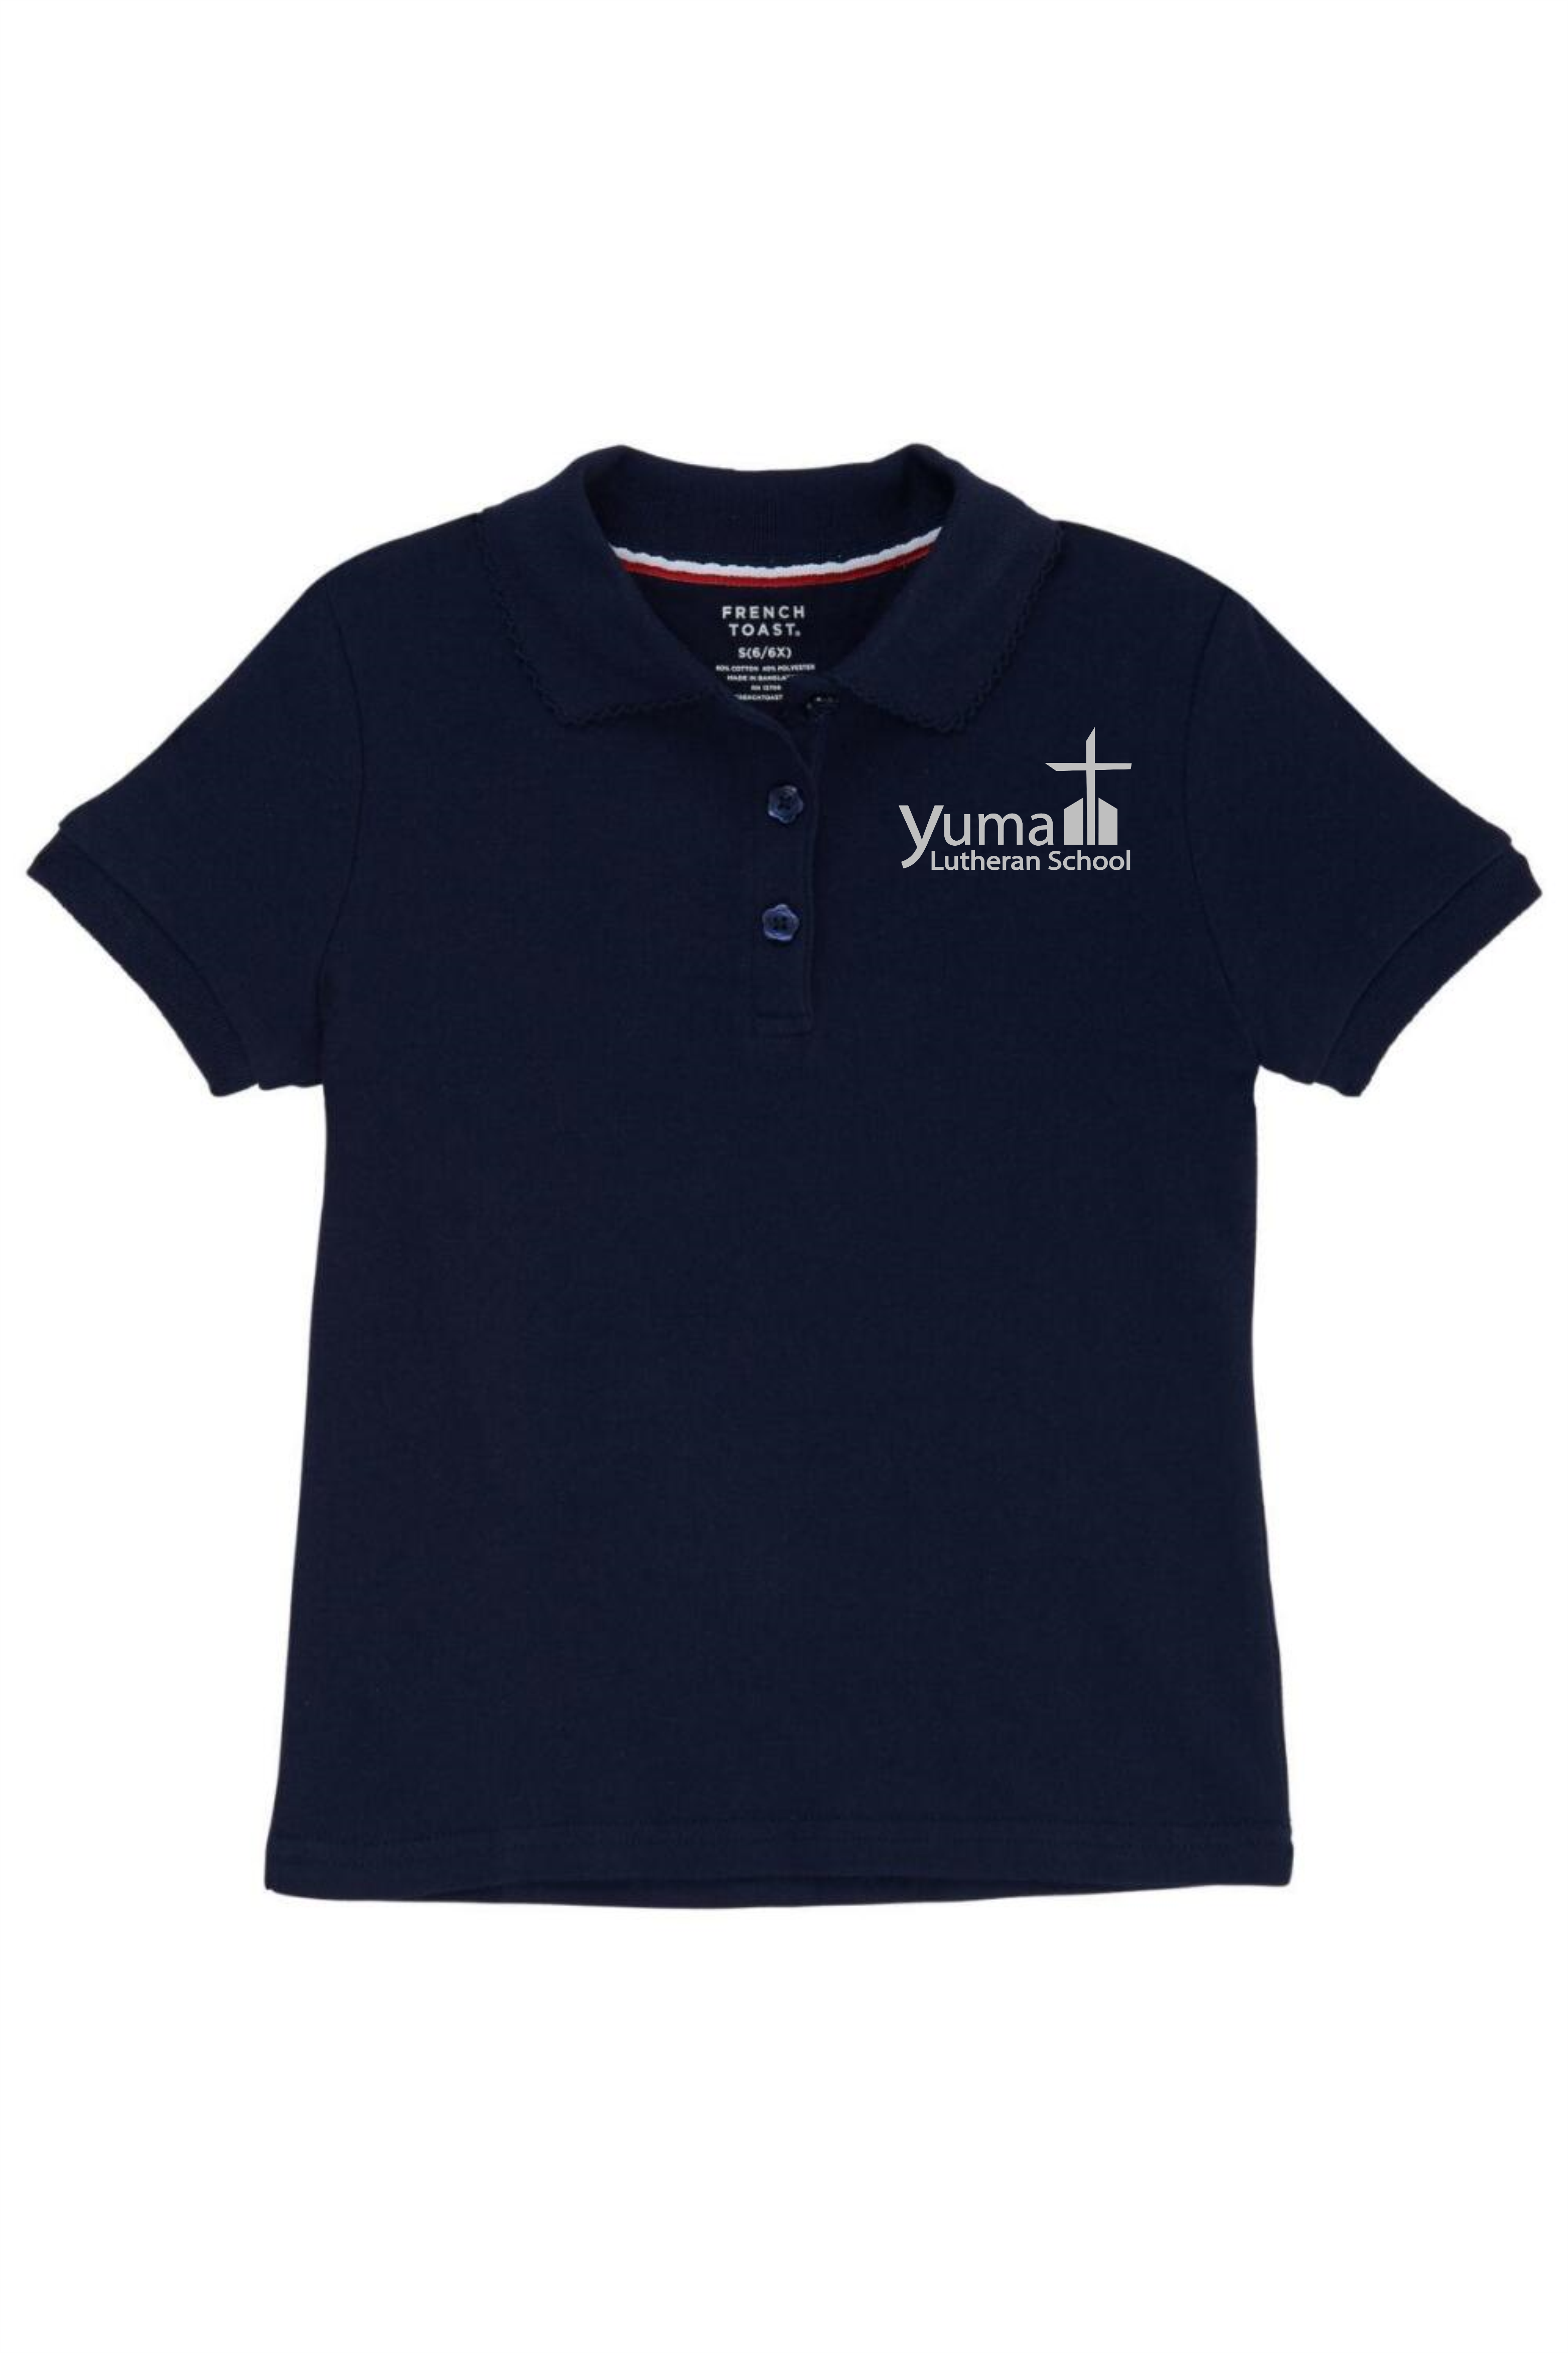 French Toast Girl's Cotton Short Sleeve Polo - YLS (Polo Size: 4T, French Toast Polo Color: Navy - YLS)